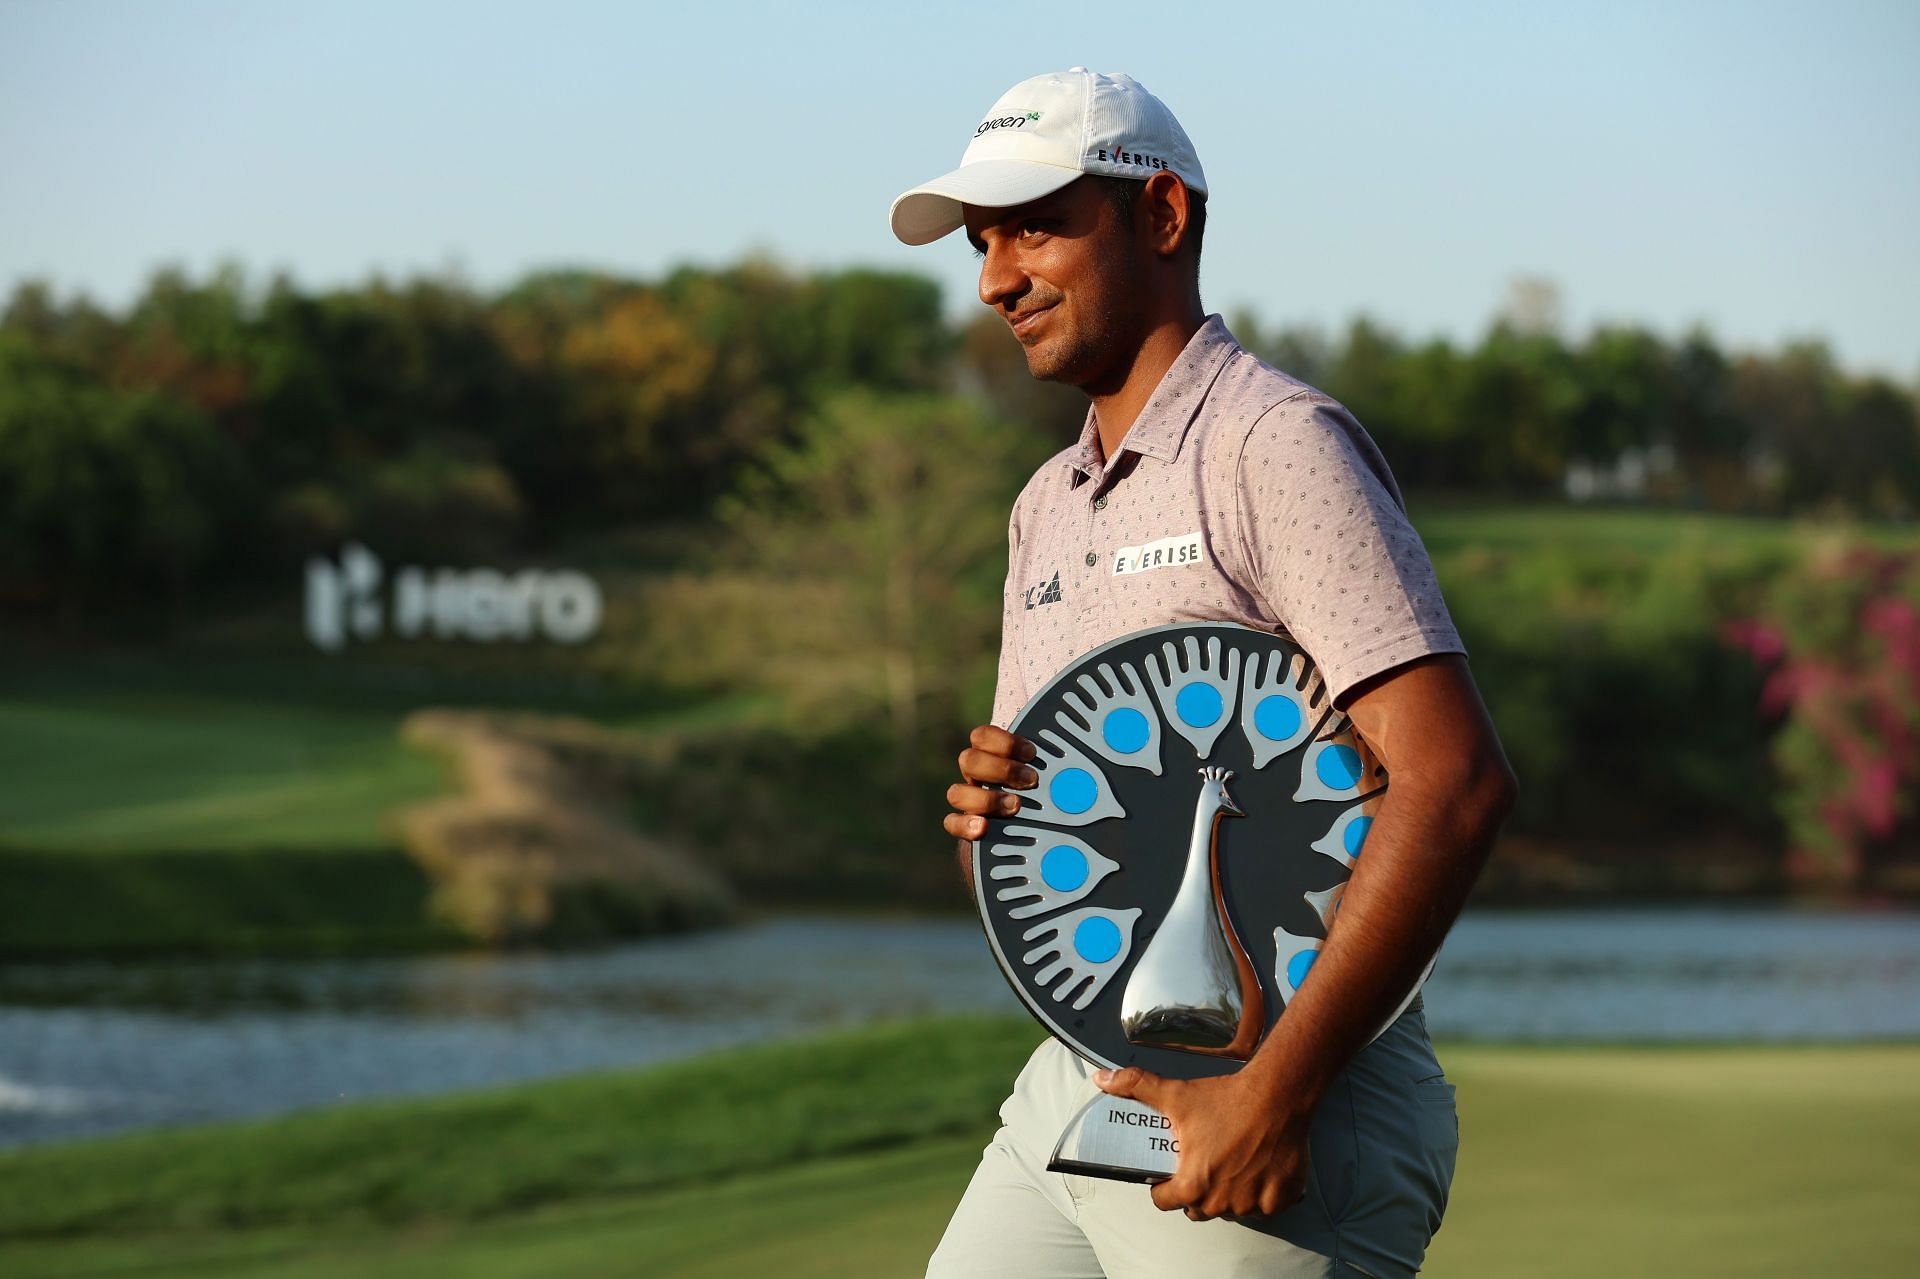 Hero Indian Open - Day Four